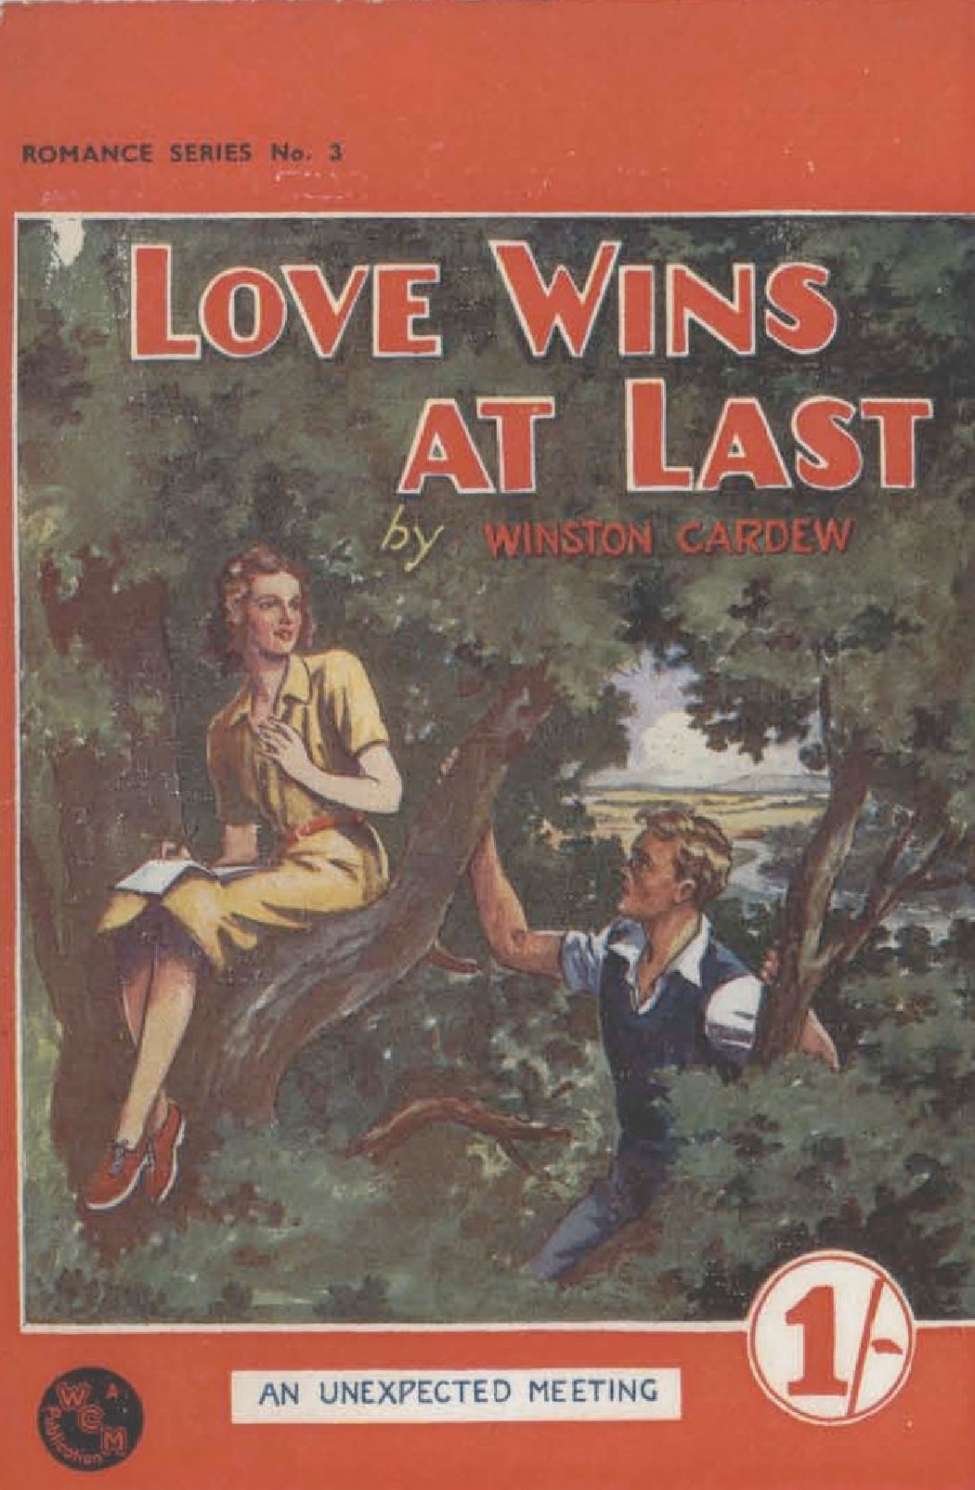 Book Cover For Romance Series 3 Love Wins At Last